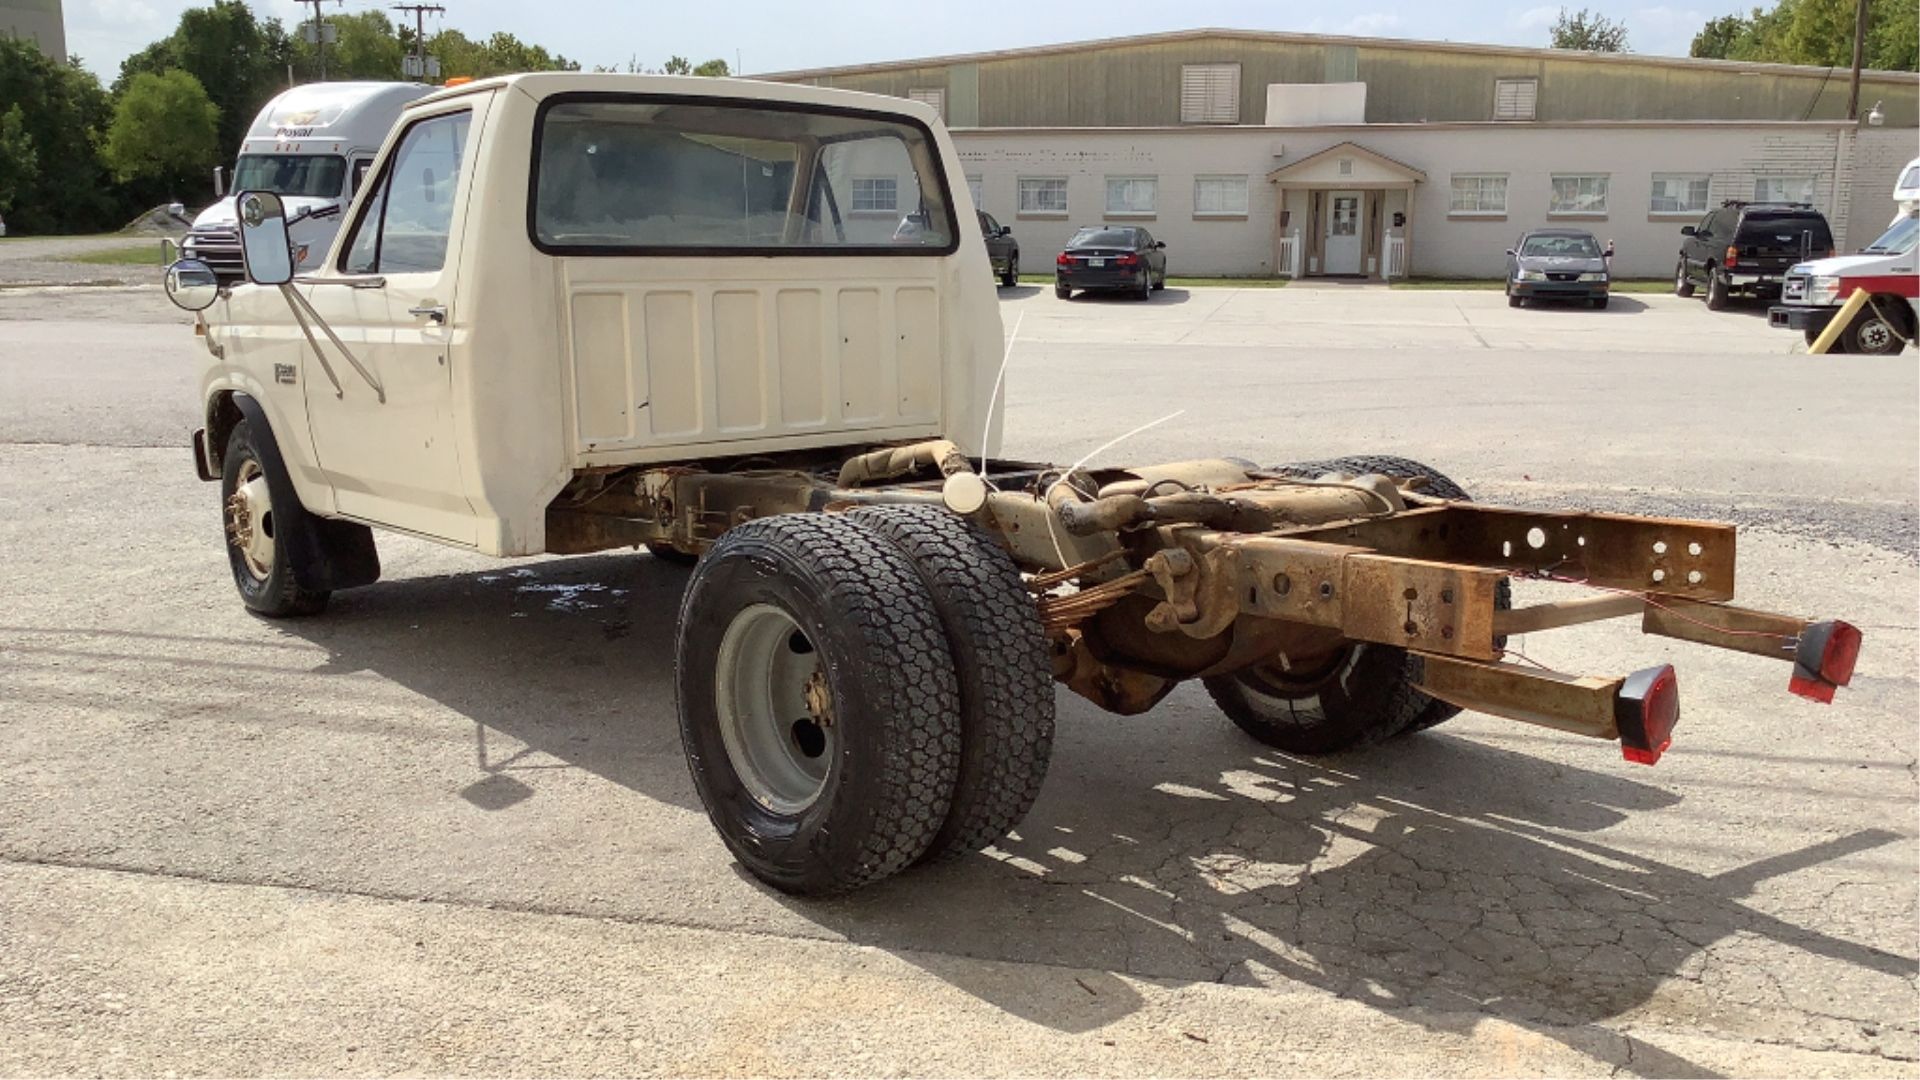 1985 Ford F-350 Regular Cab Chassis Truck 2WD - Image 14 of 83